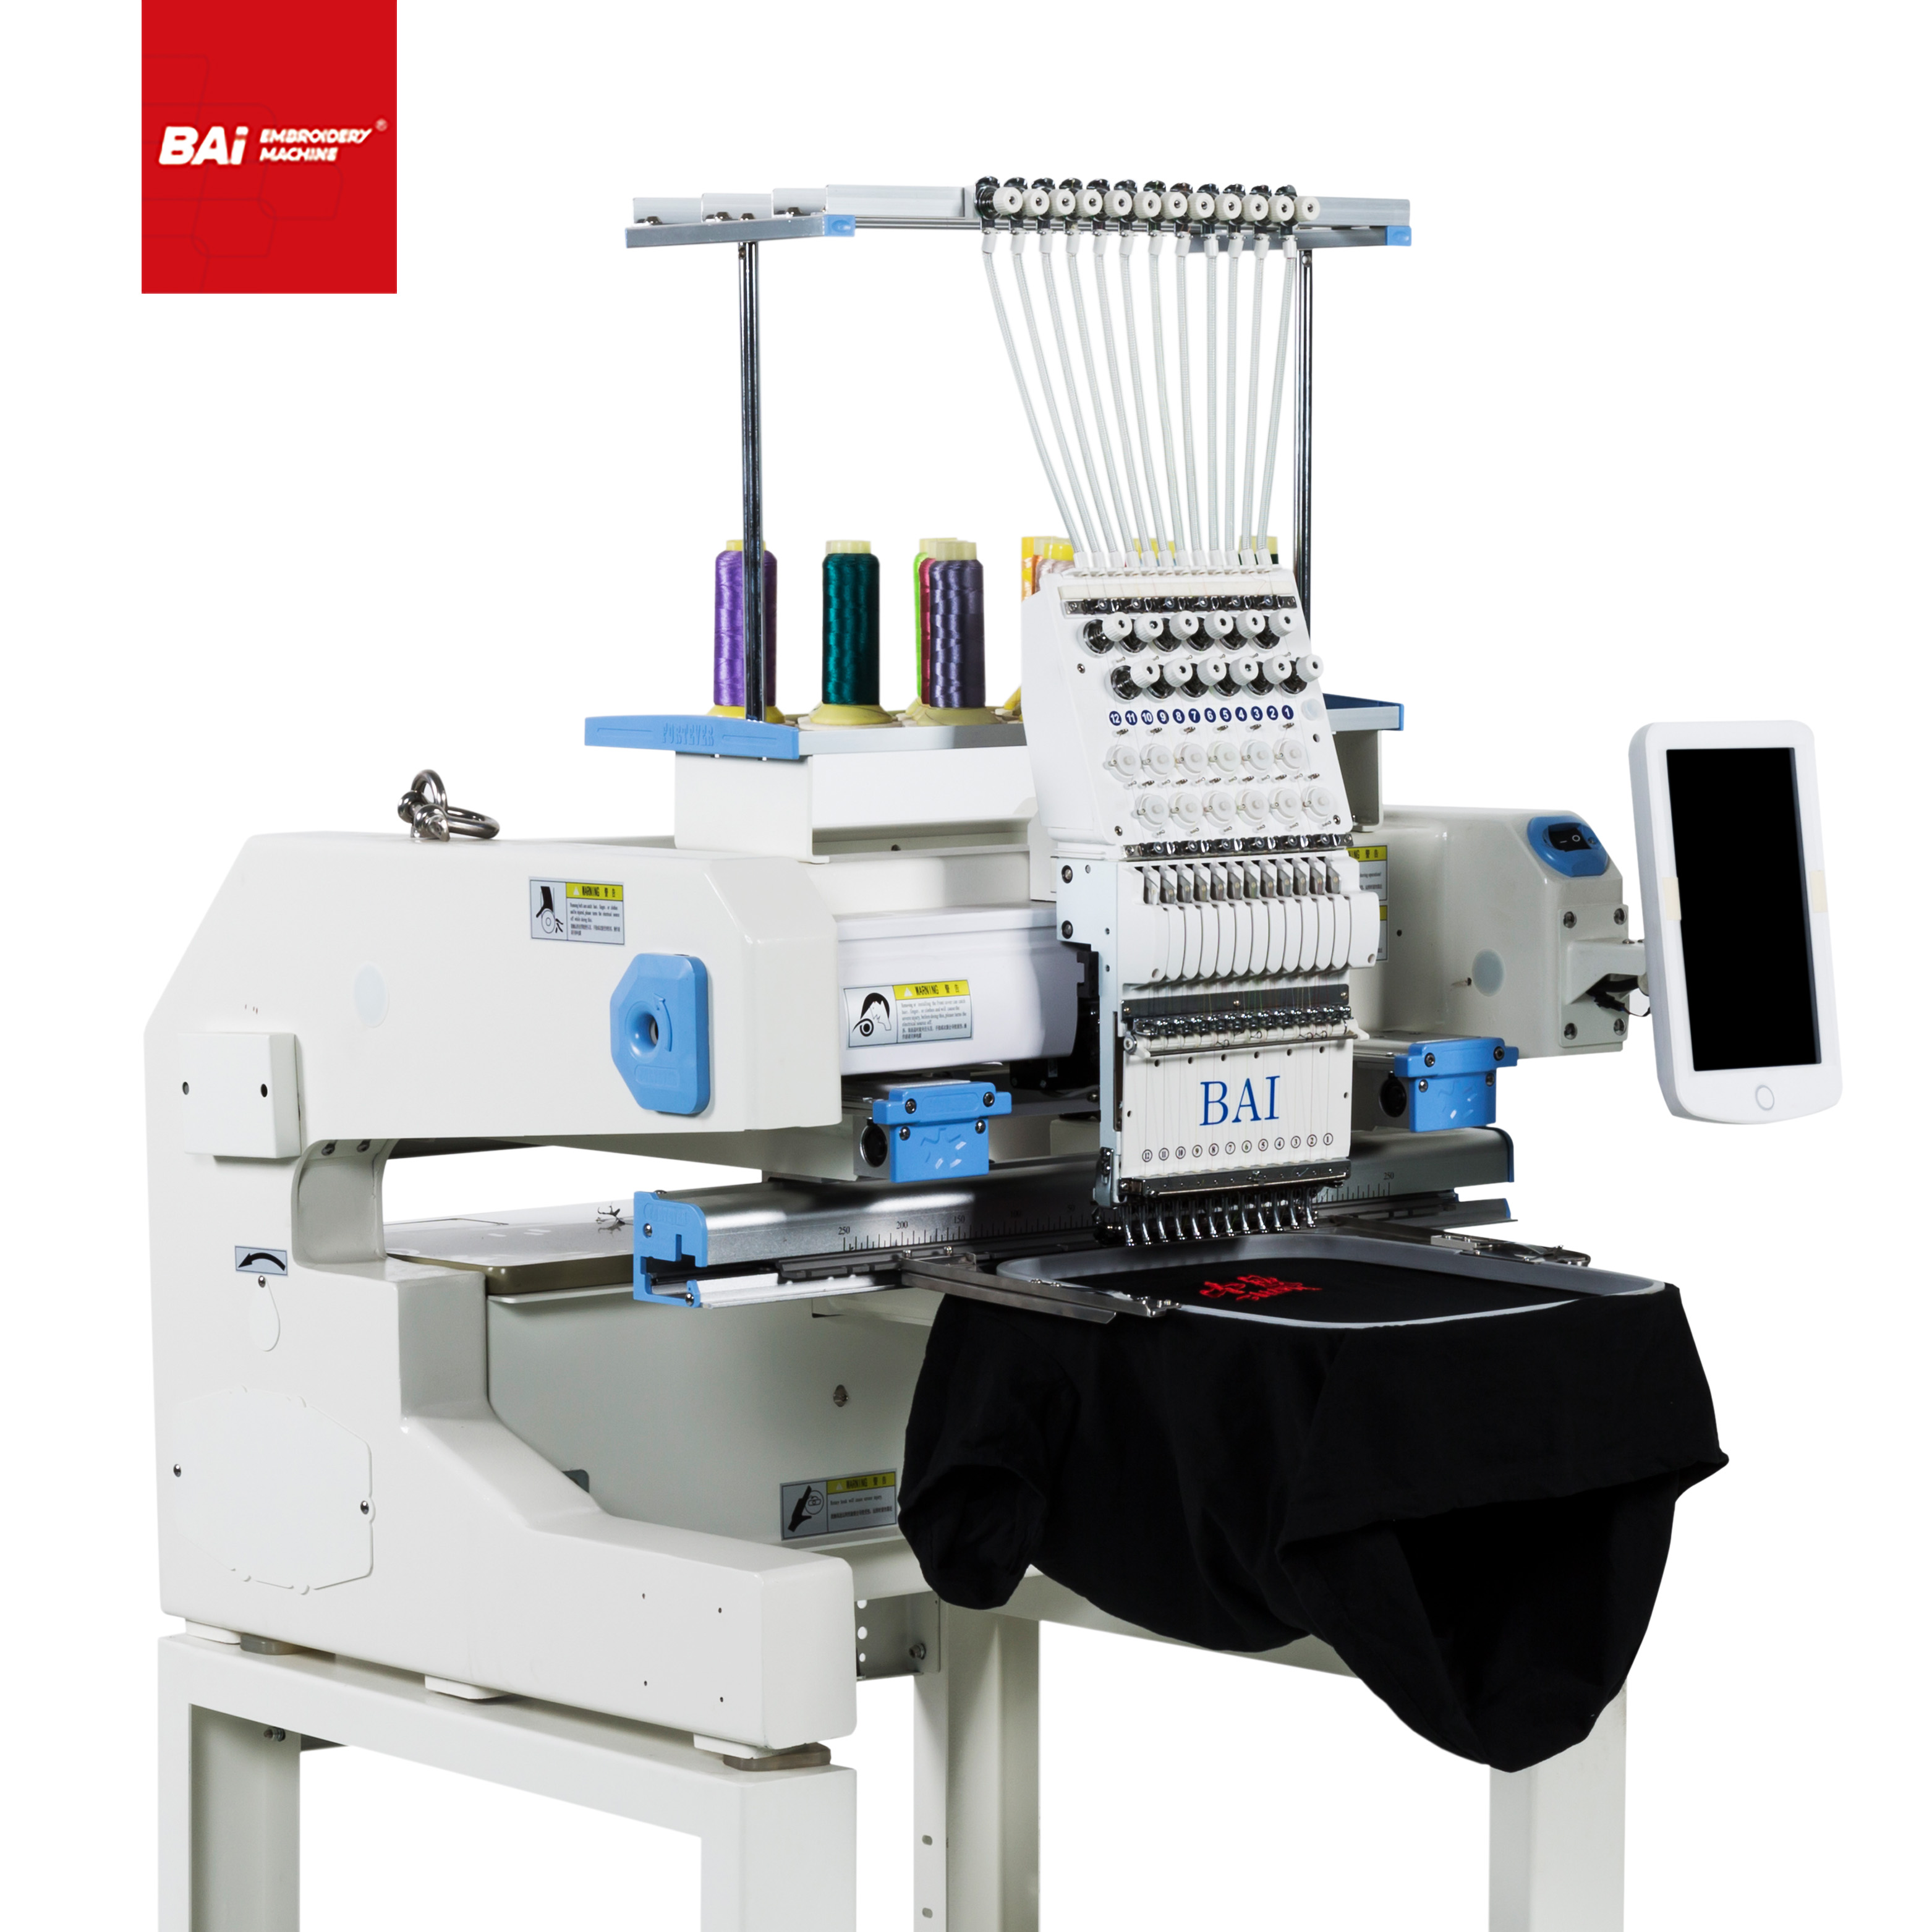 BAI Computerized 12 Needle Embroidery Machine Price for Professional with High Speed